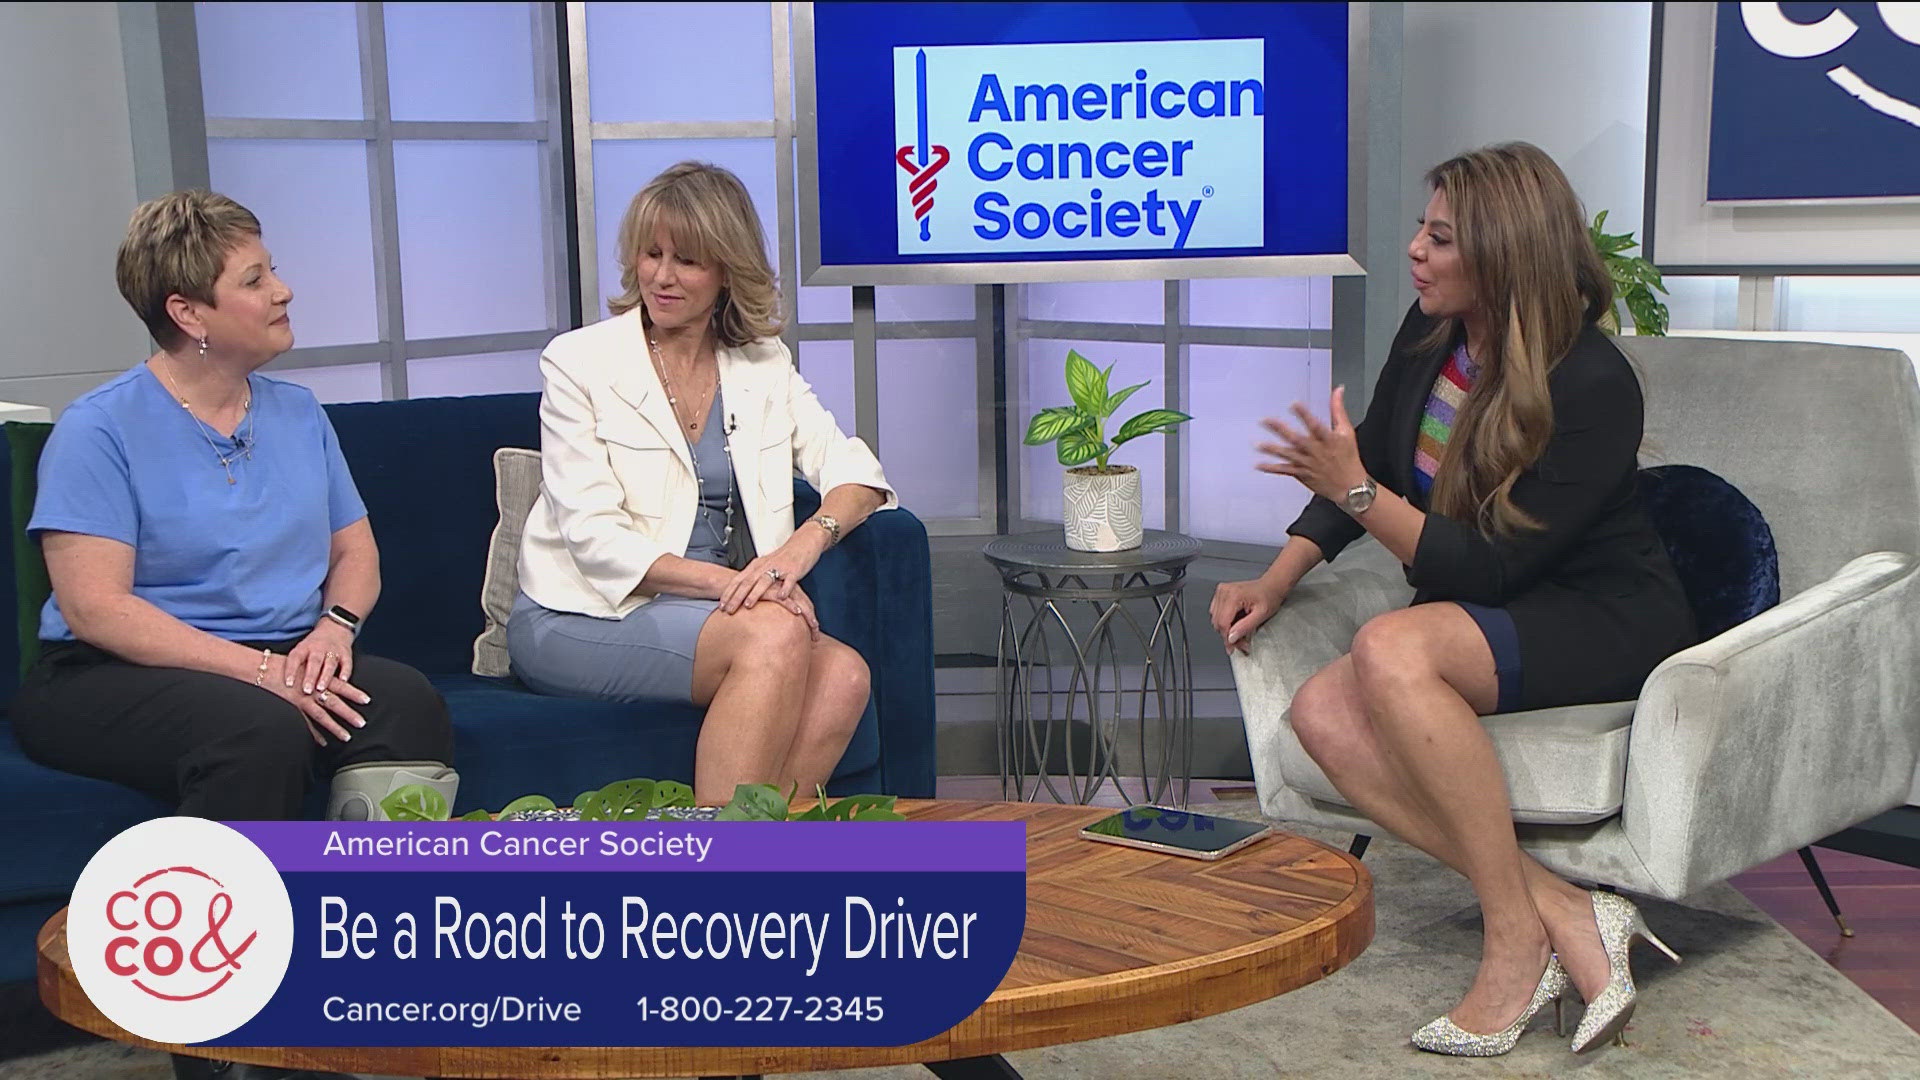 The American Cancer Society is actively looking for volunteers to transport patients to treatment. Learn more and volunteer at Cancer.org/Drive.